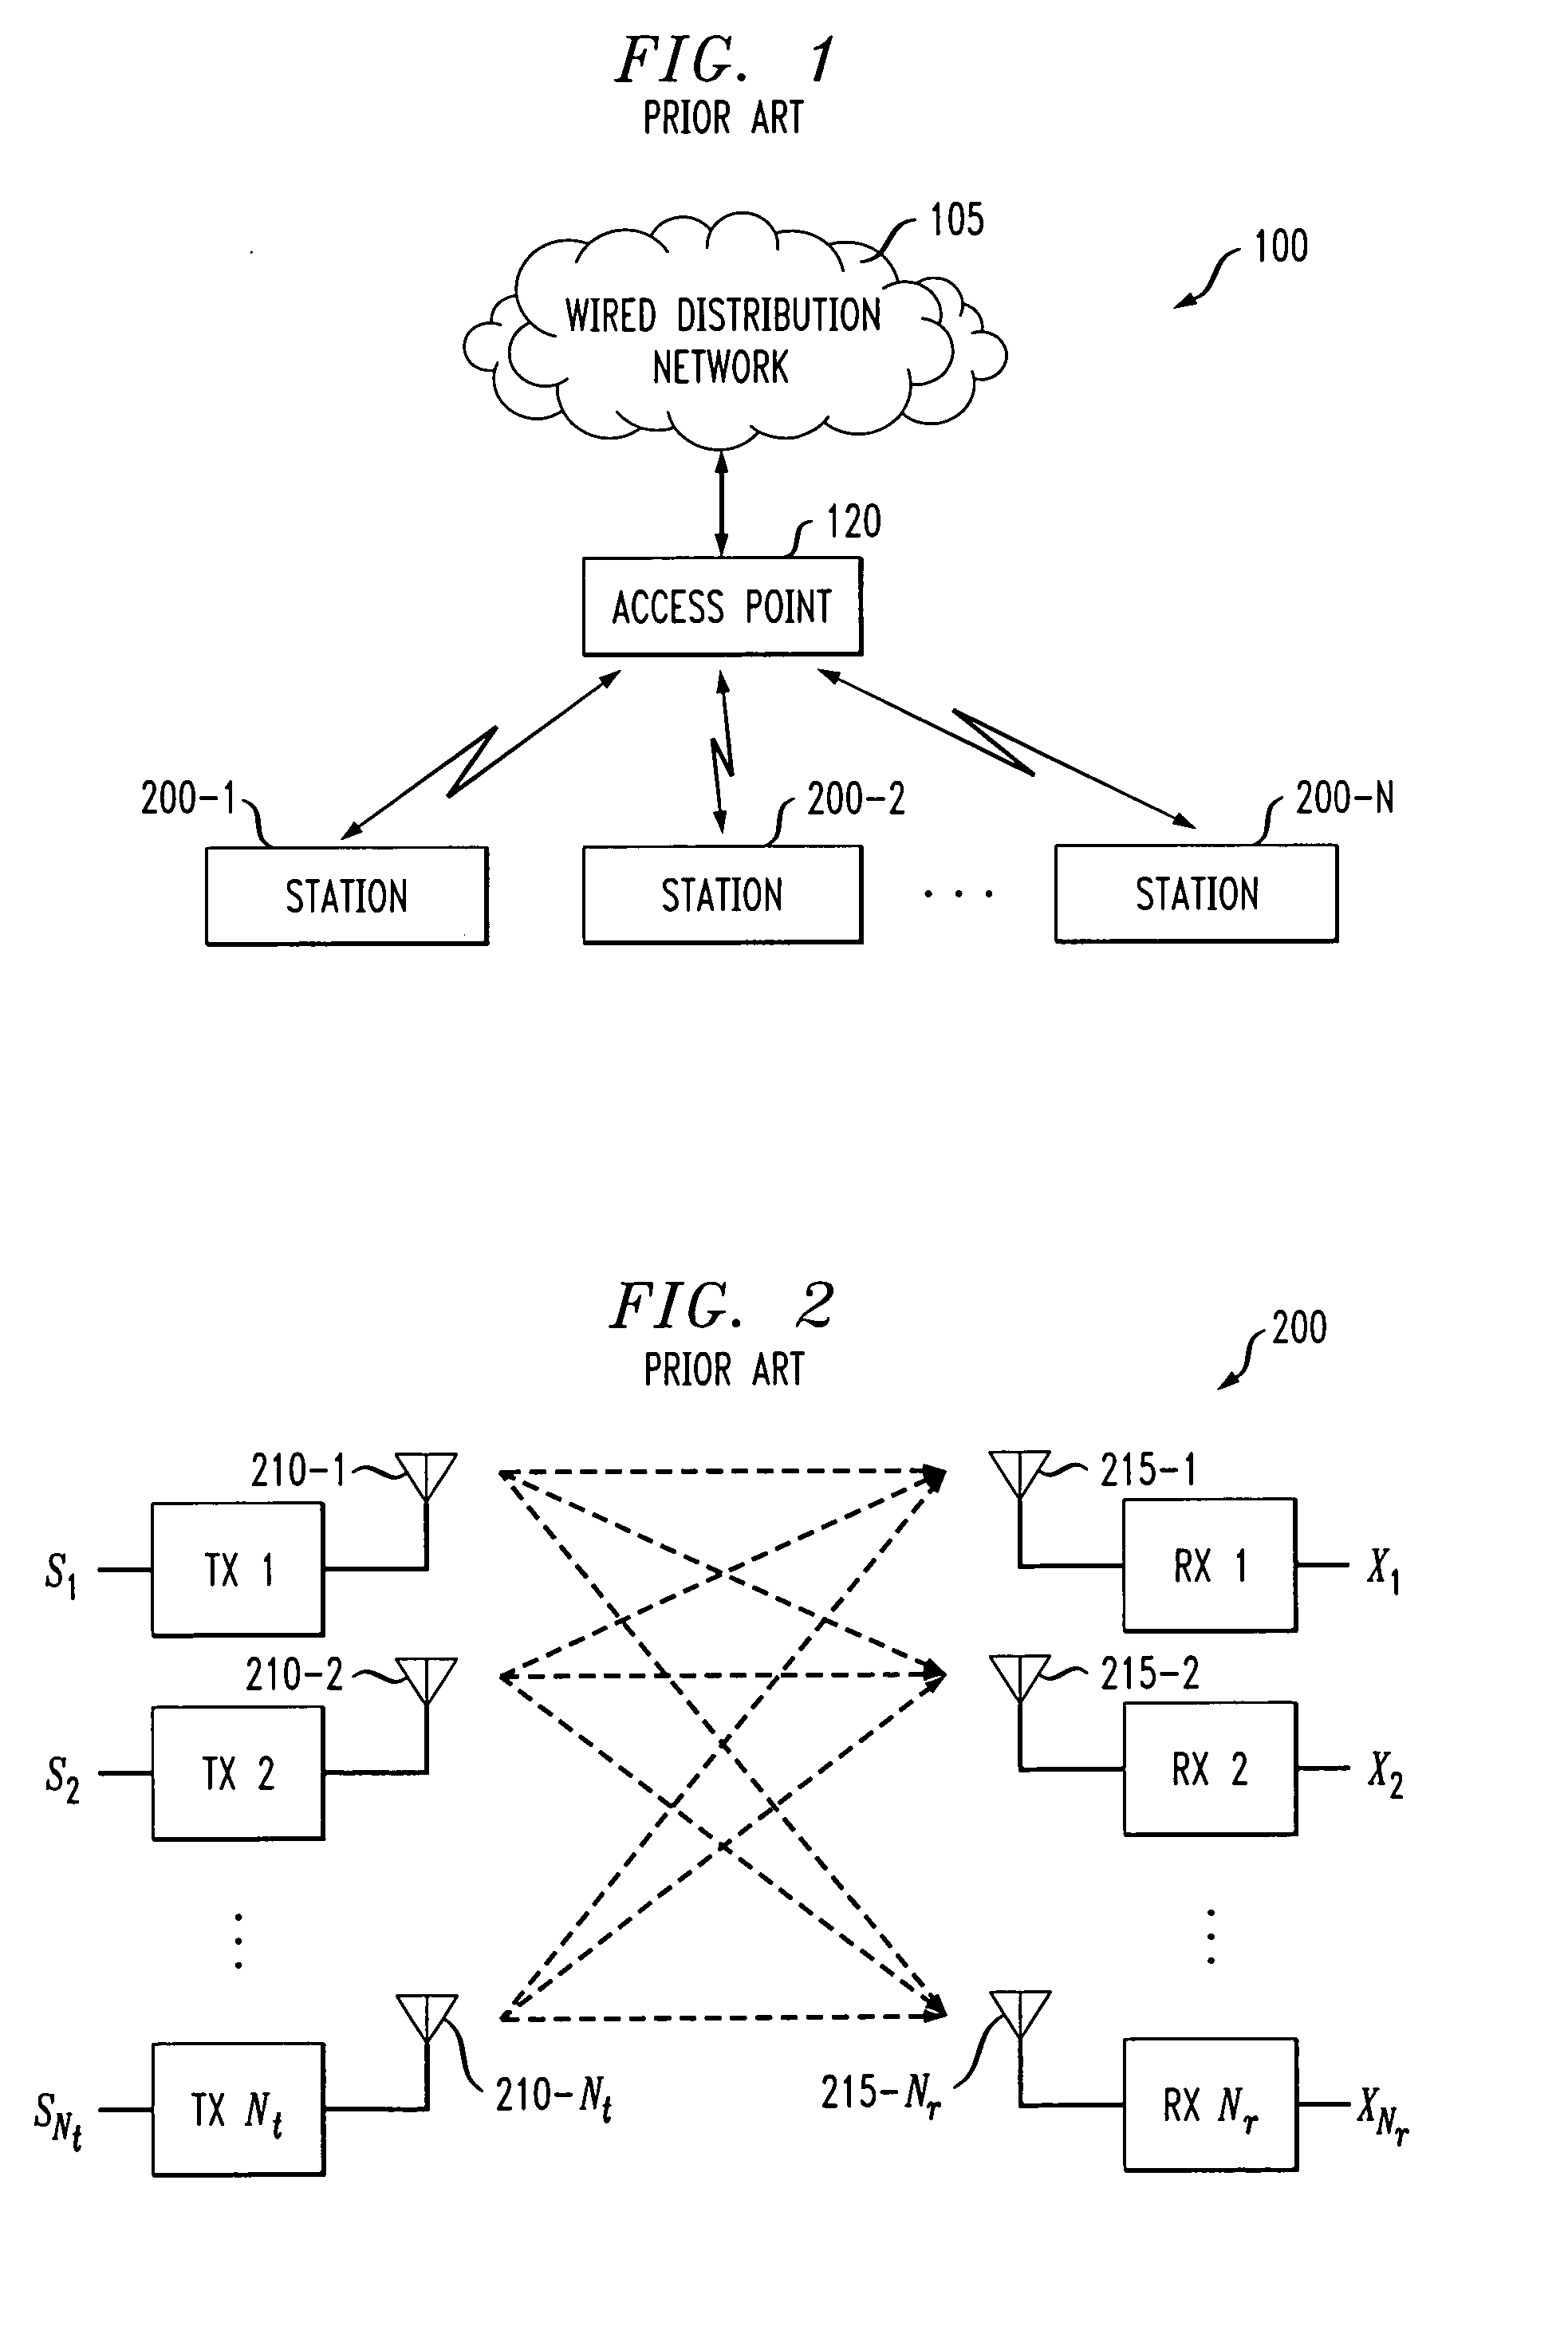 Method and apparatus for automatic data rate control using channel correlation in a wireless communication system